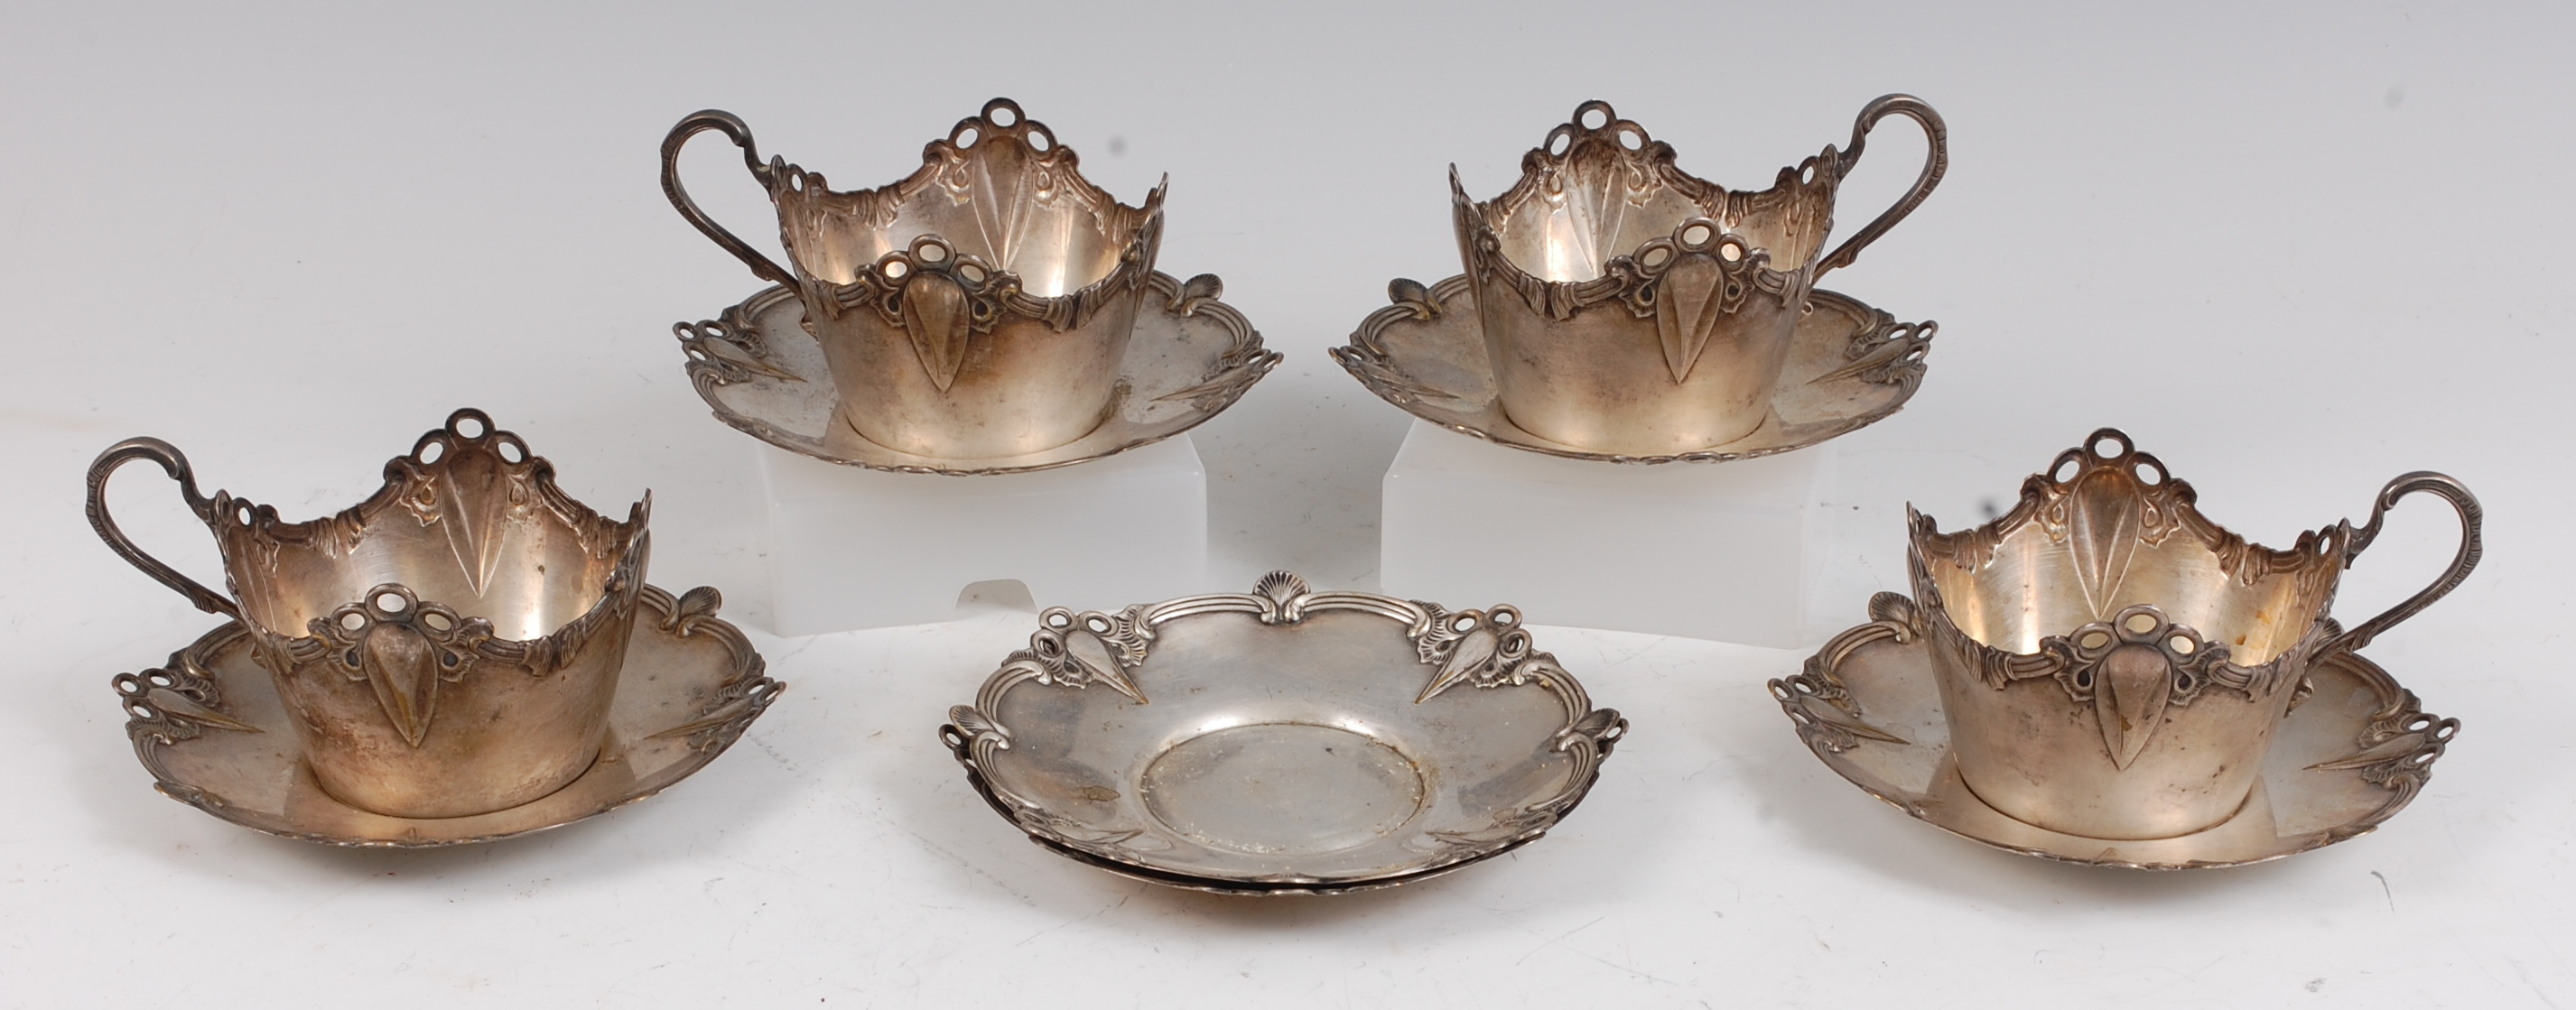 A set of four WMF Art Nouveau white metal teacup holders, dia.9cm; together with a matching set of